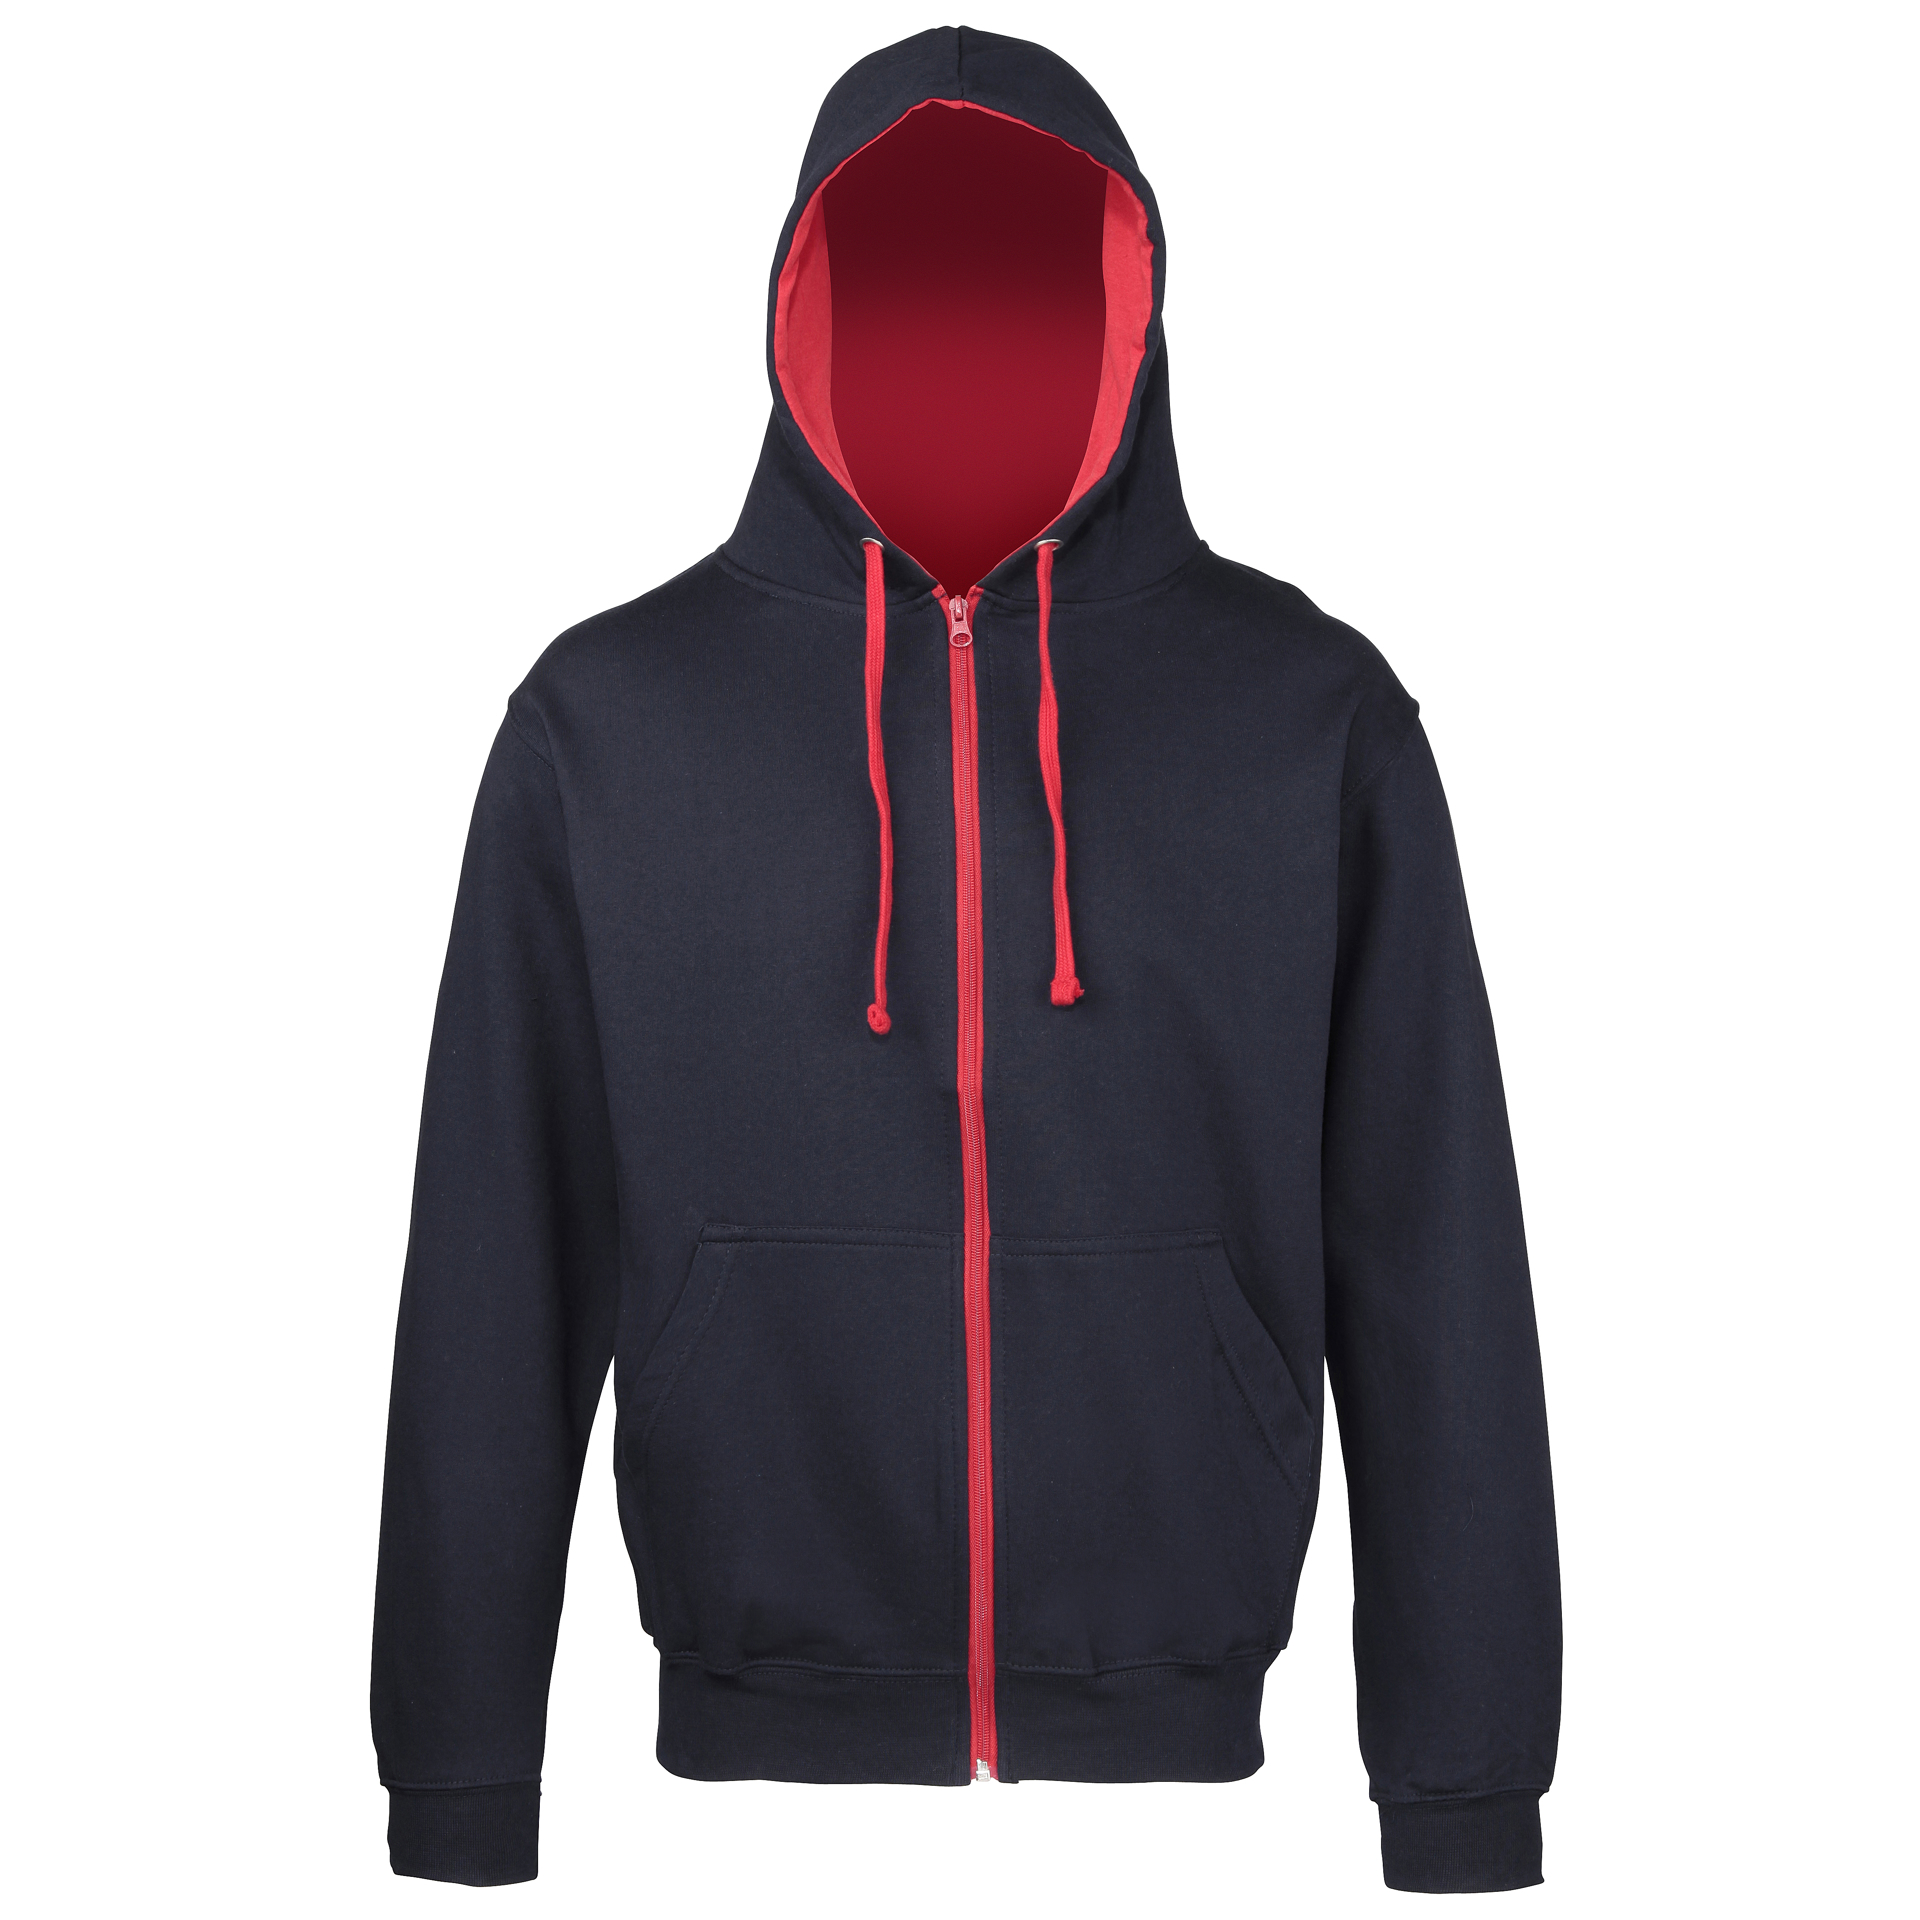 Men's Varsity Hoodie in navy with red details and lining